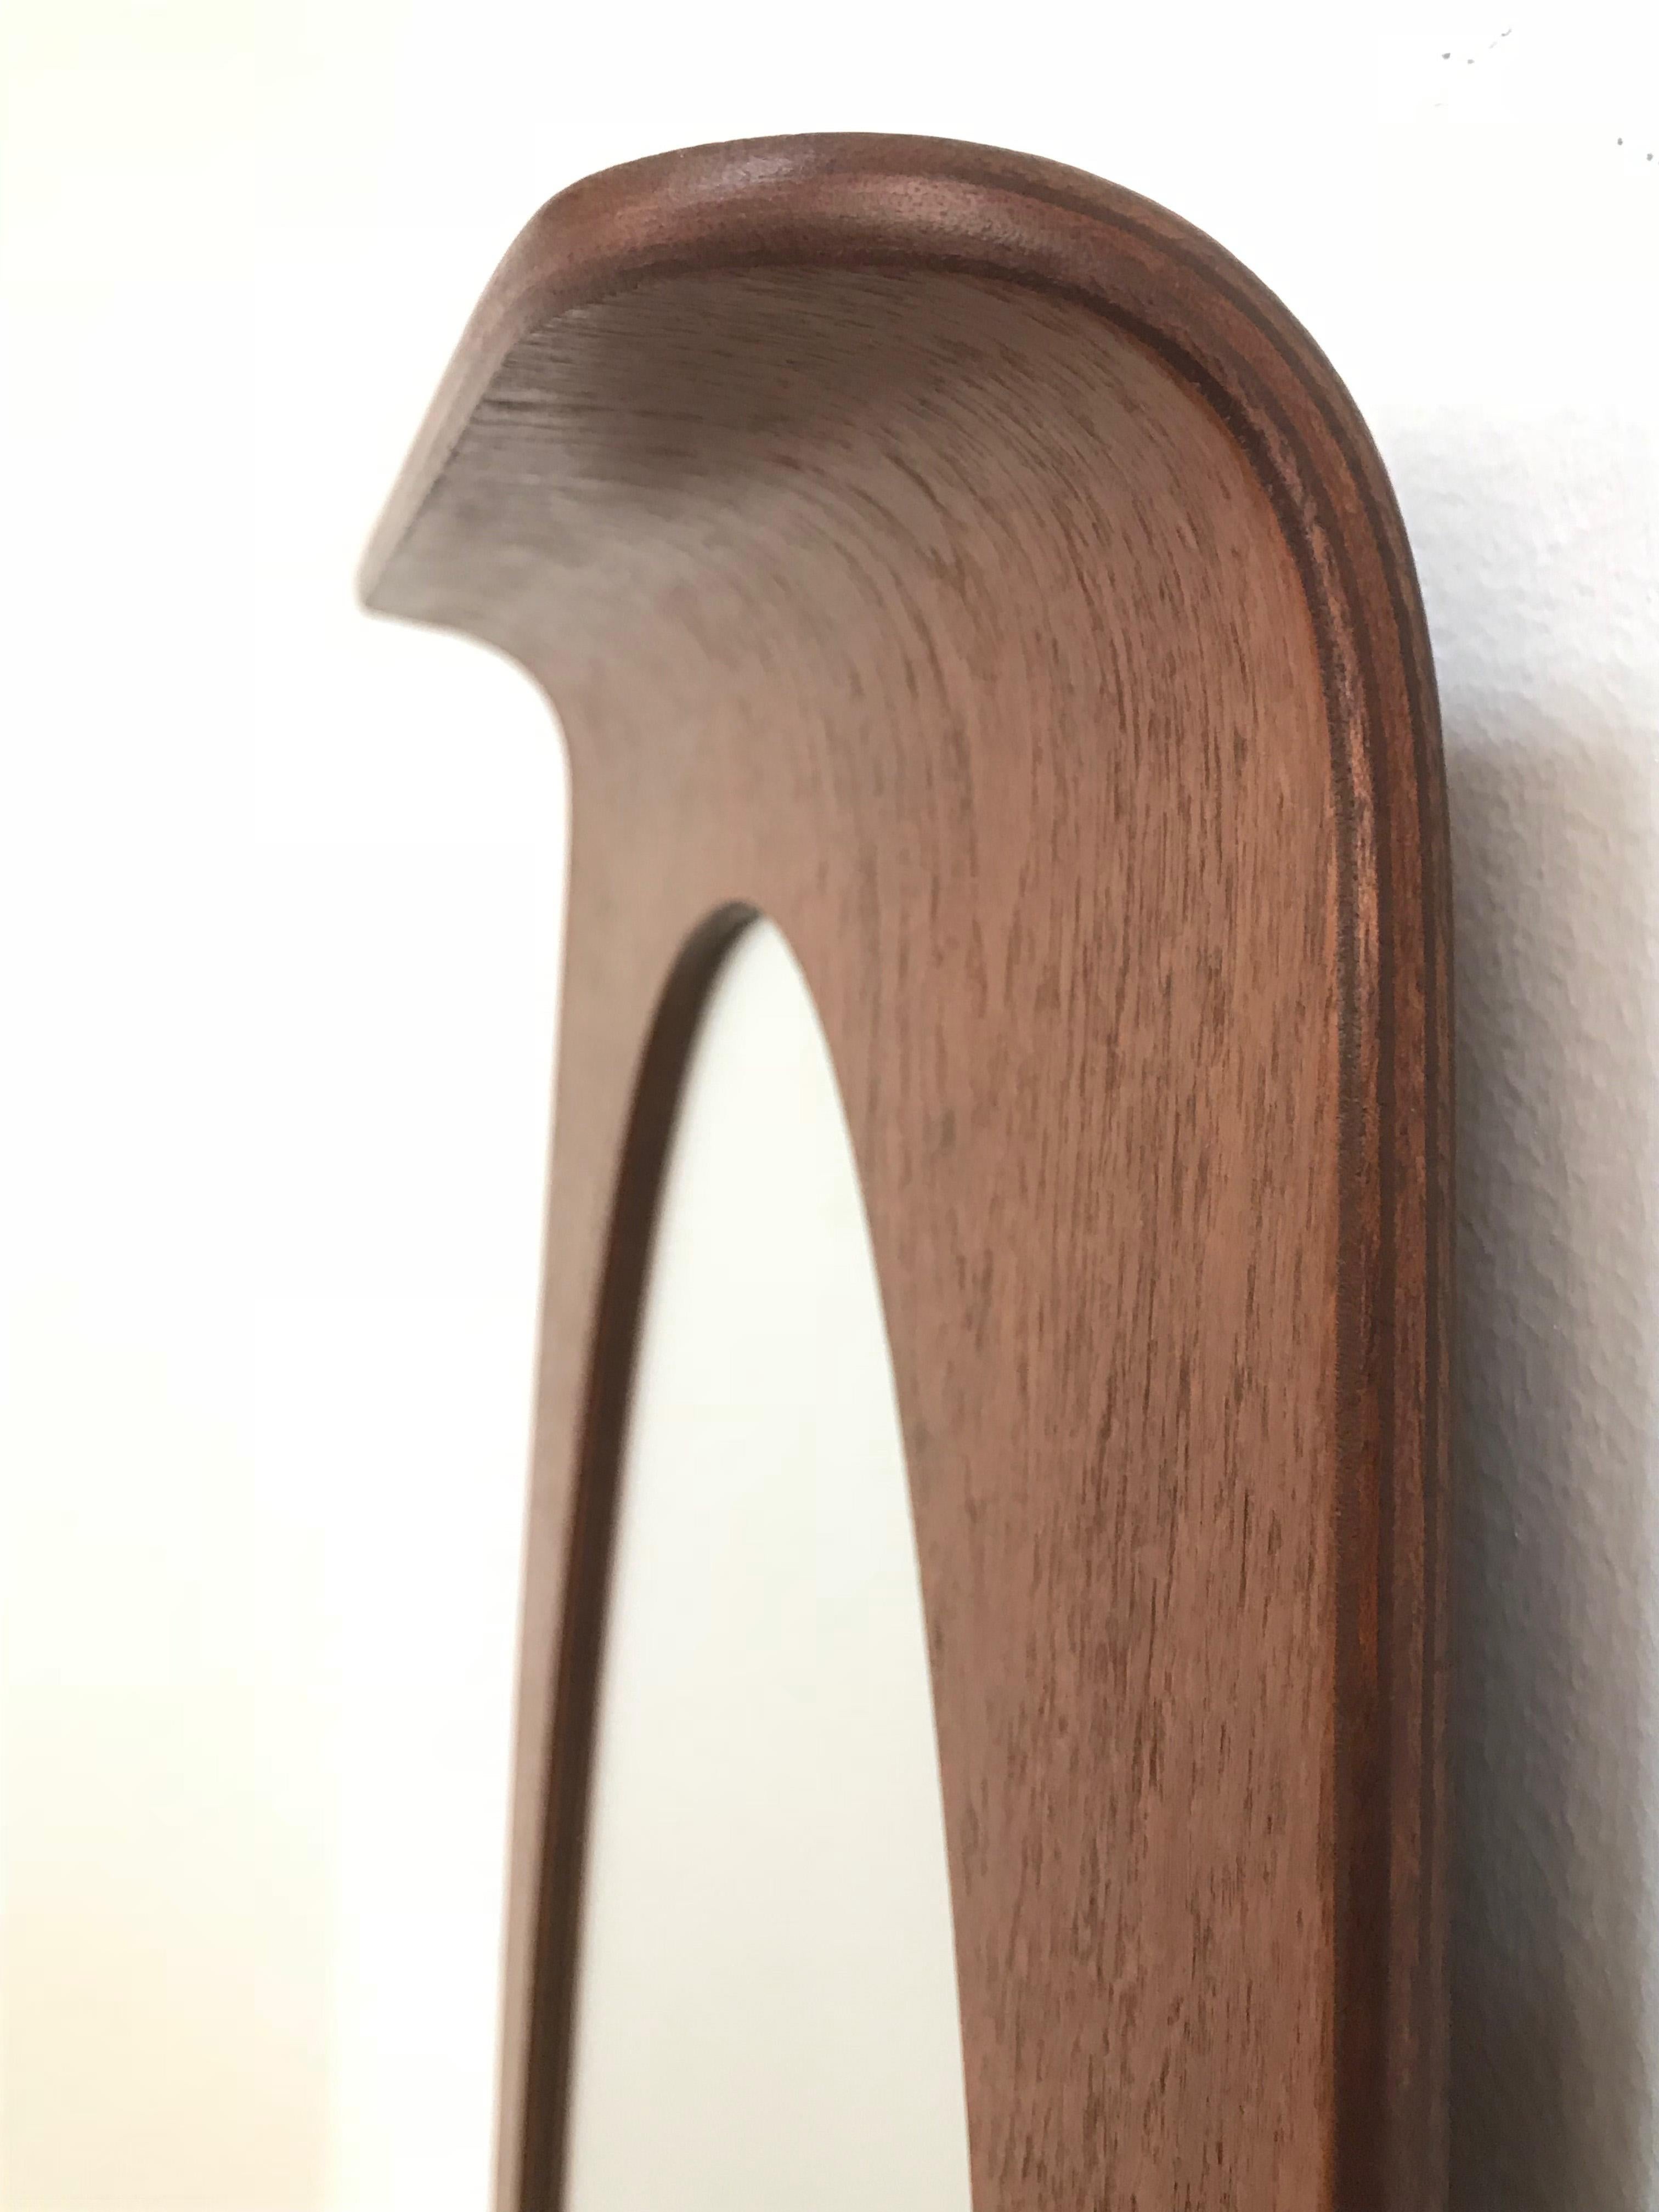 Franco Campo & Carlo Graffi Wall Mirror in Curved Wood, Italy, 1960s 2